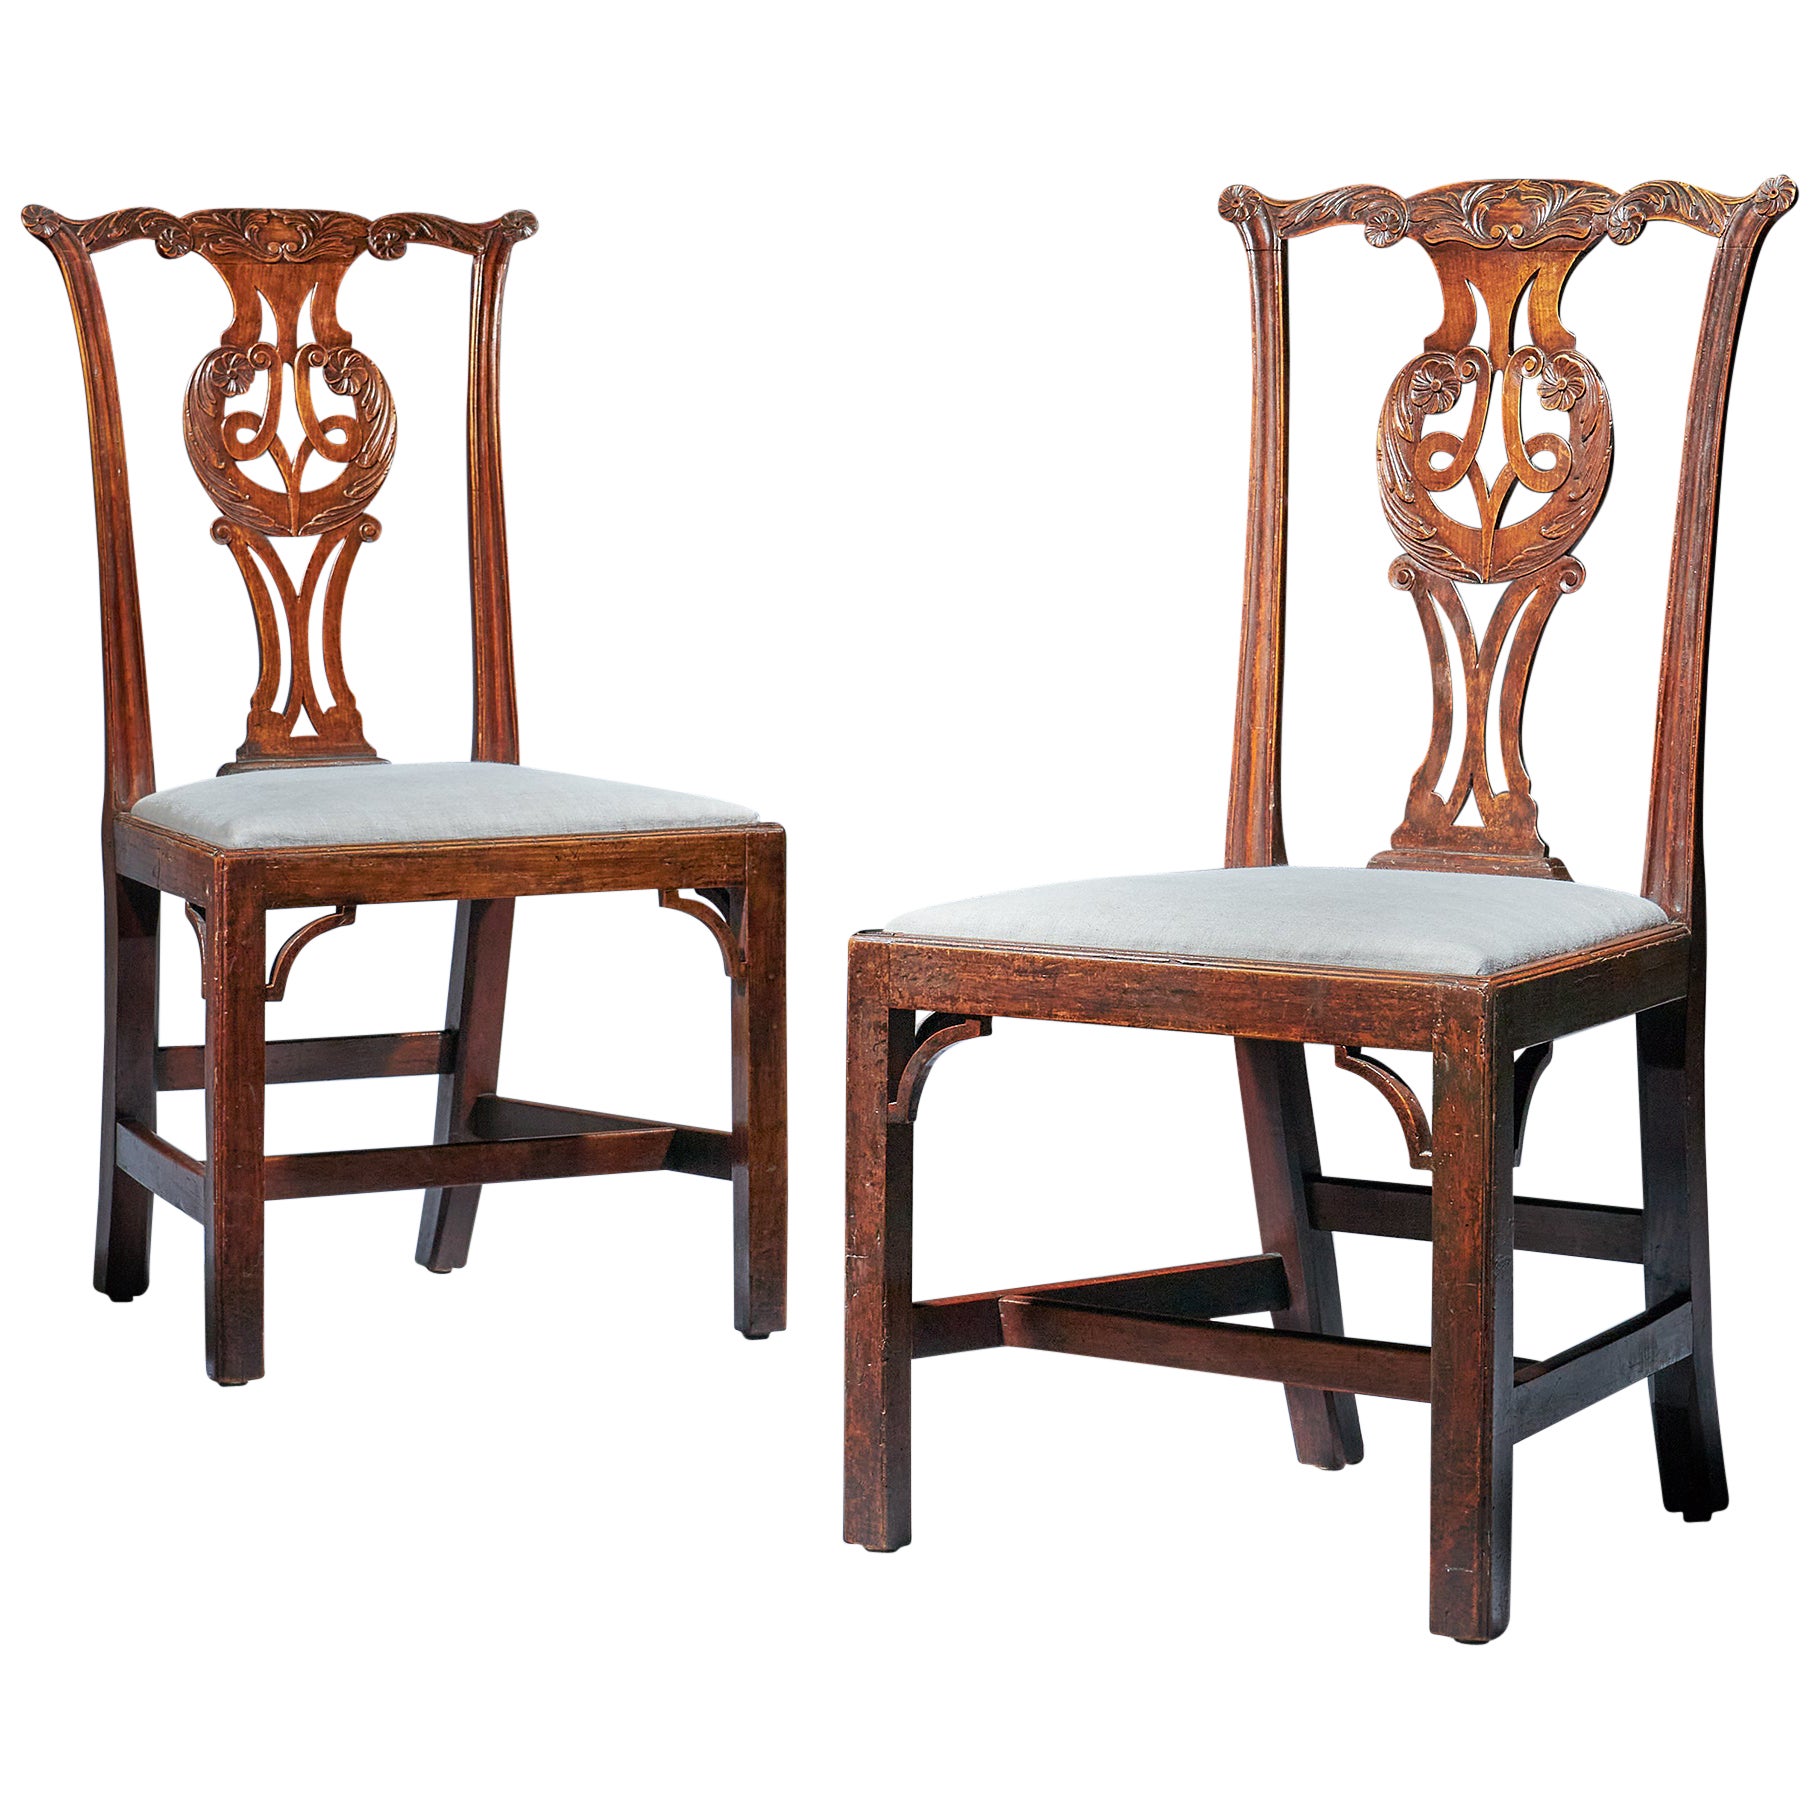 Unusual Pair of 18th Century George III Cherry Chairs, Chippendale Period